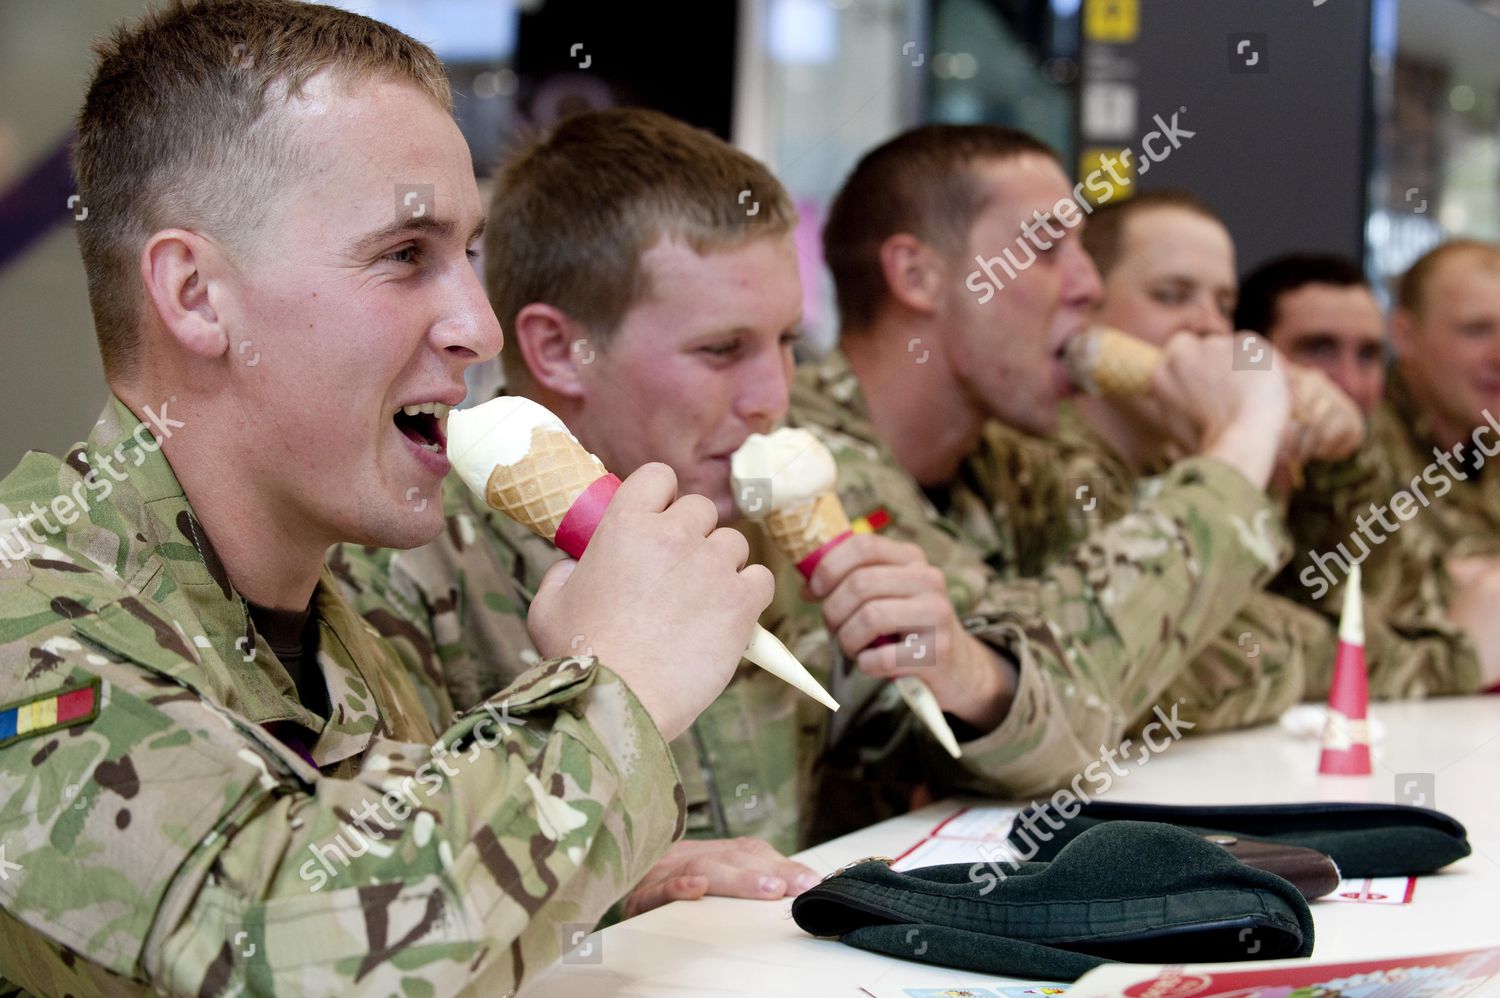 soldiers-enjoy-some-downtime-eating-ice-cream-at-westfield-stratford-25-7-12-pic-david-crump-olympics-games-london-2012-shutterstock-editorial-2756613a.jpg